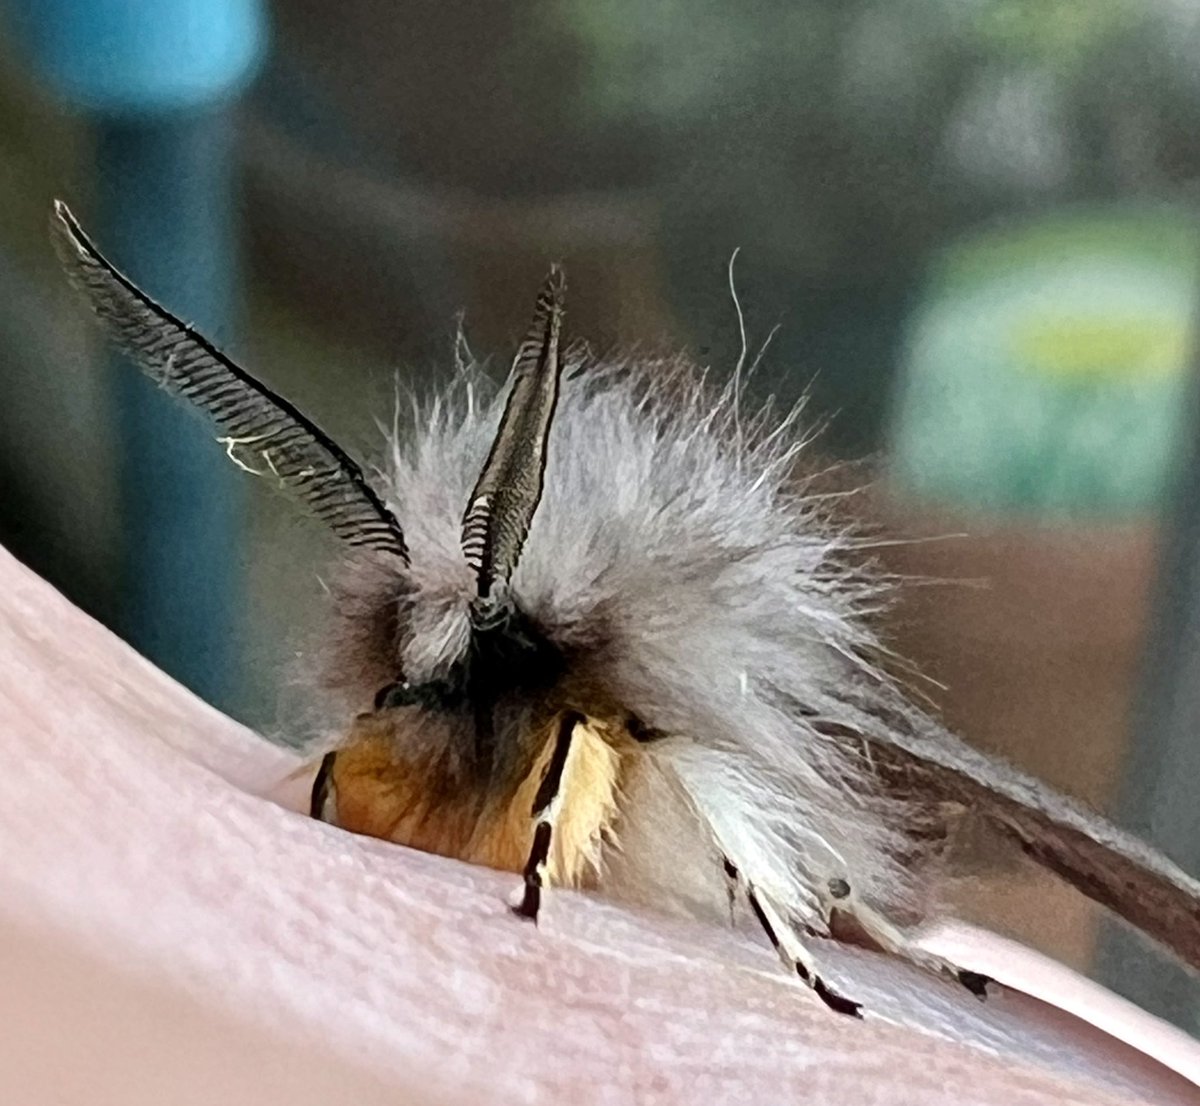 Brrrr cold night meant just the one chap in the garden trap. He was a sensible chap as he was wearing his warmest scarf! 😀 Muslim moth looking very fluffy! #moths @BCWarwickshire